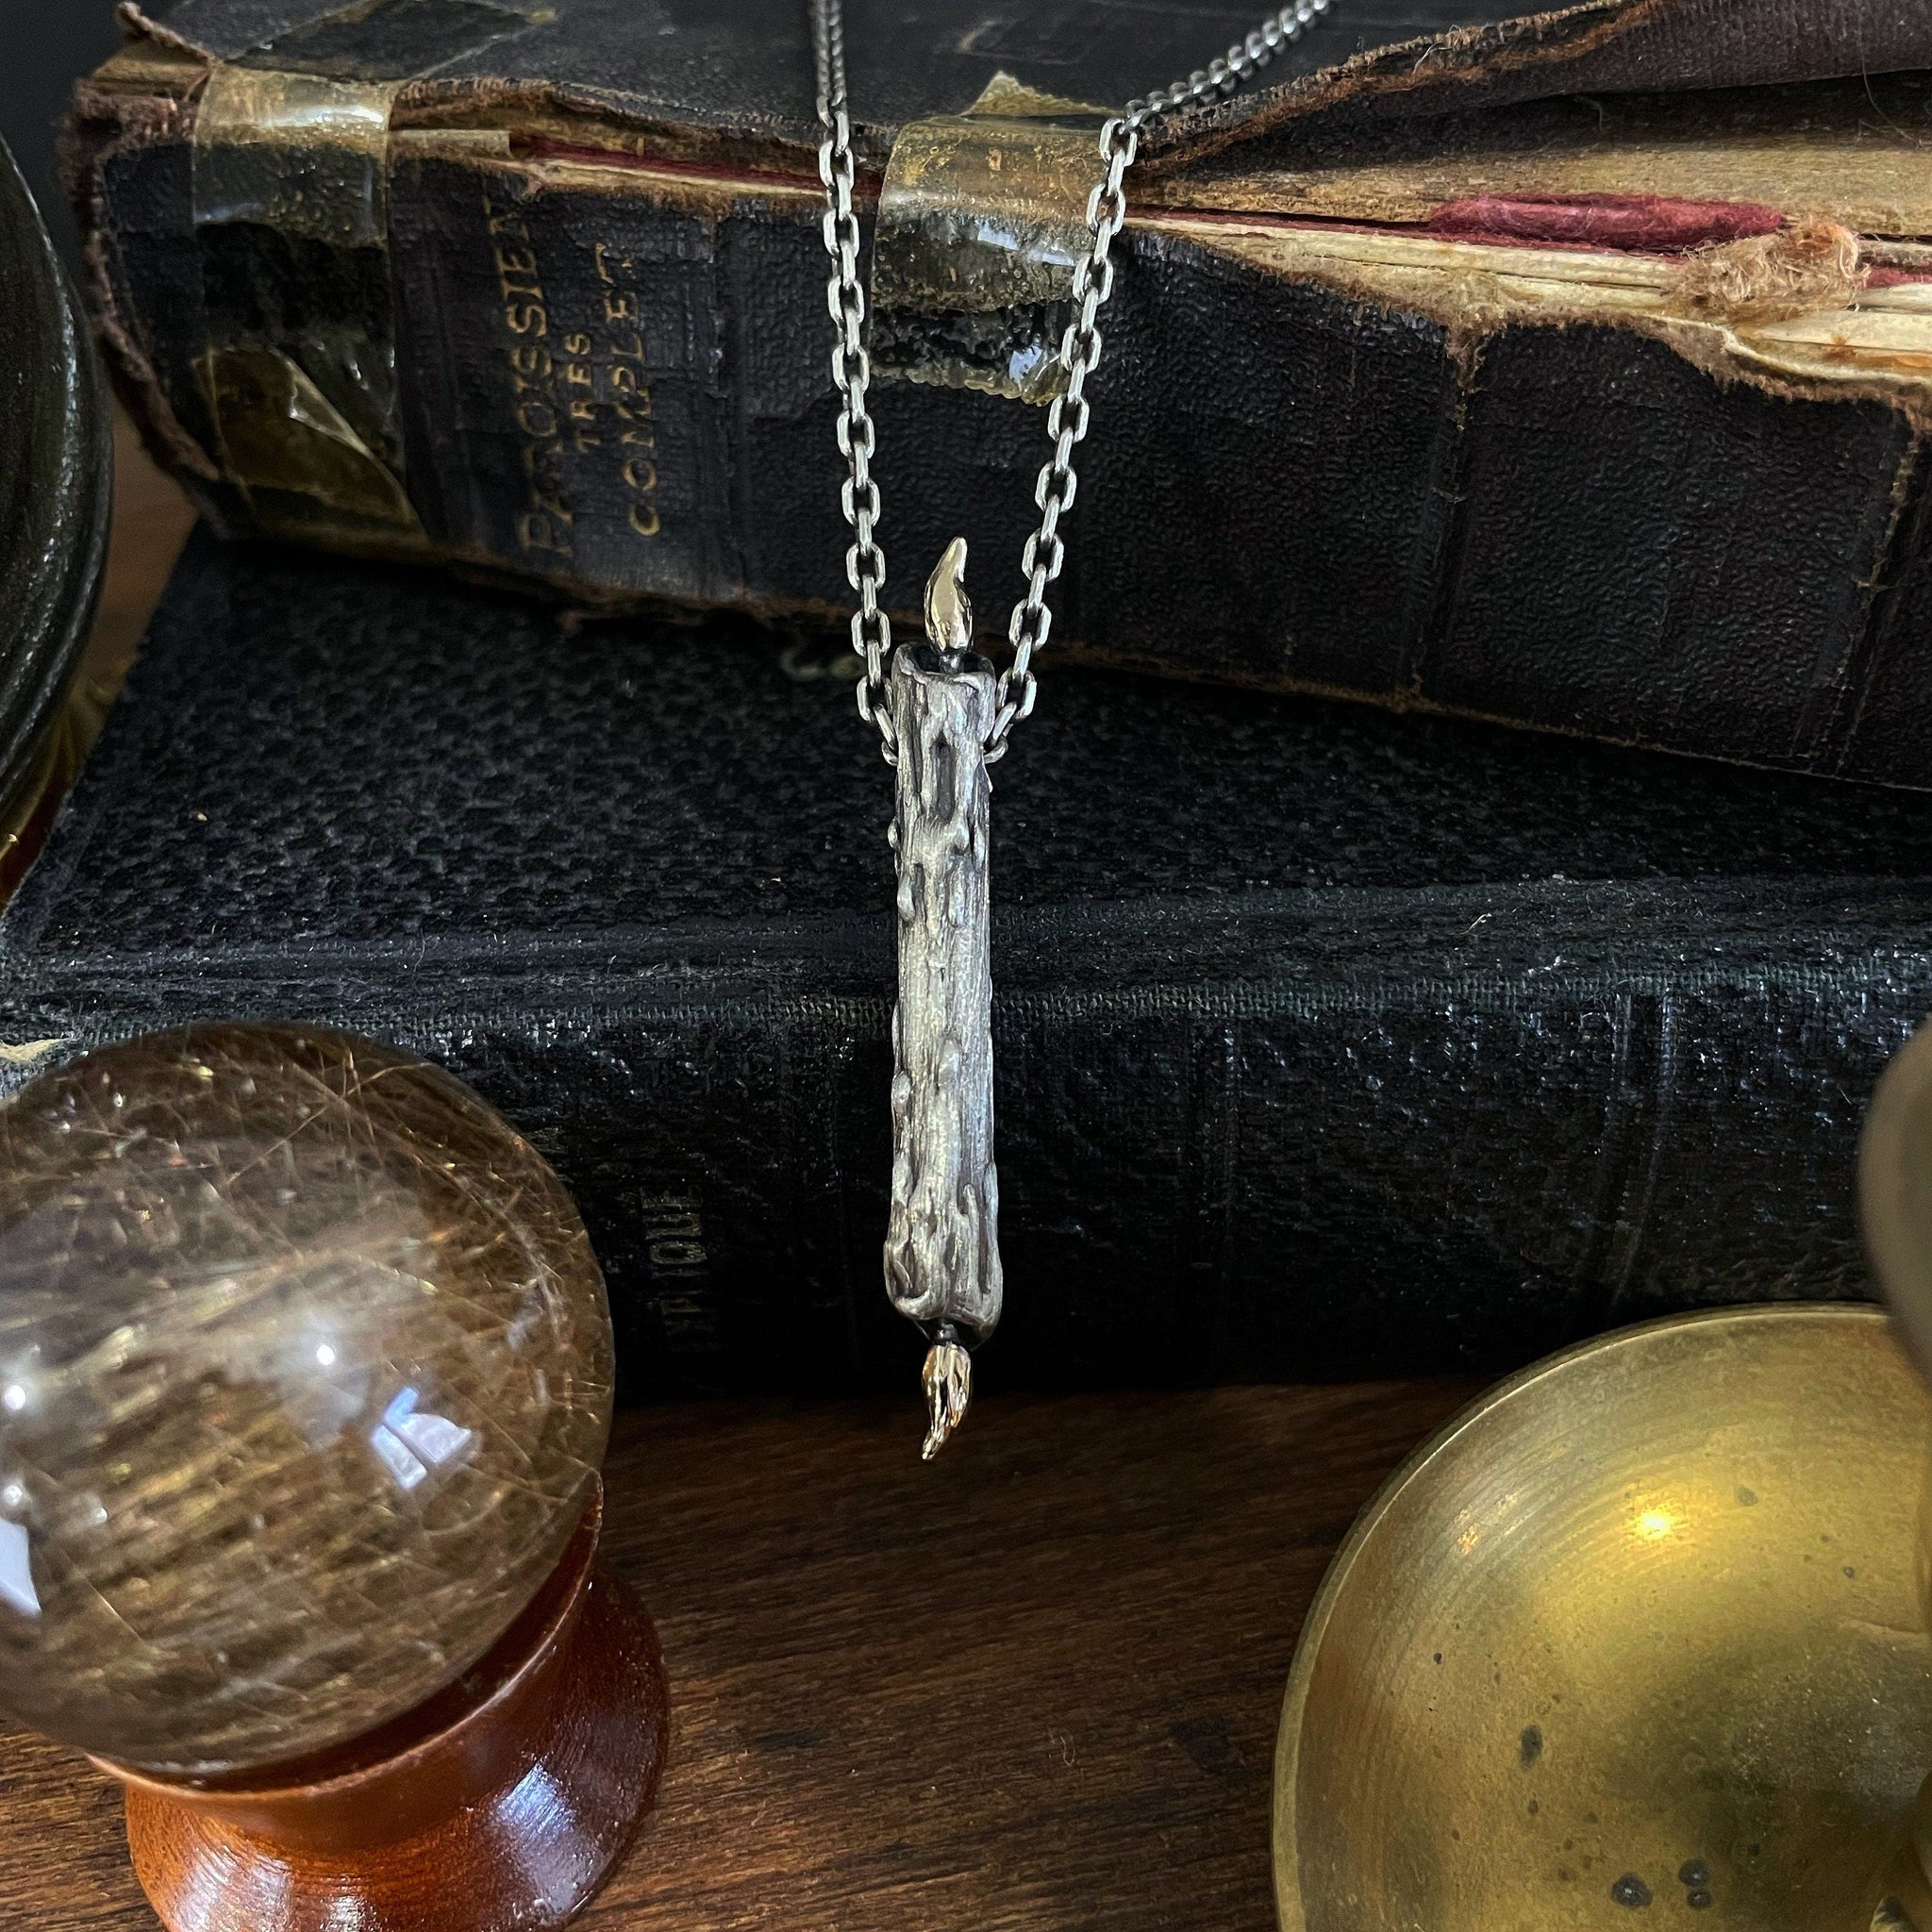 Midnight Society Pendant - Burning at Both ends Candle - ready to ship